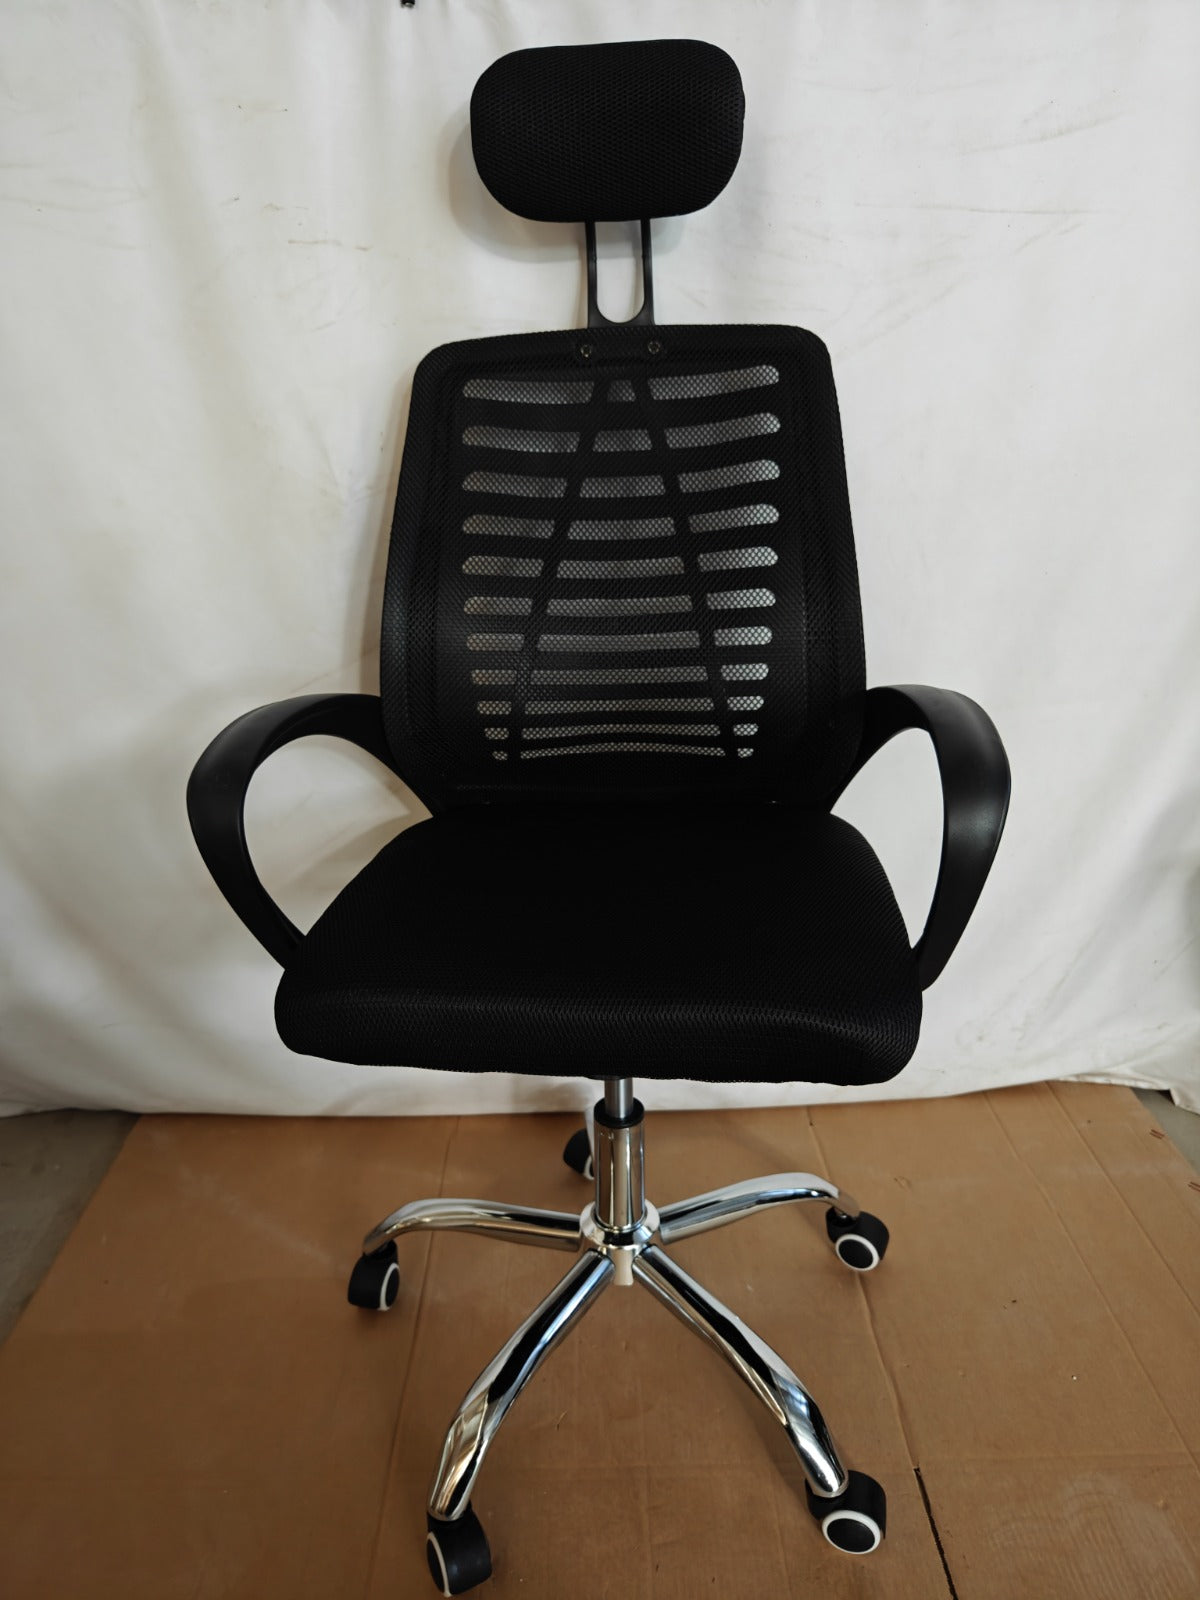 Office Chair with headrest - Brand New Ergonomic Mesh Office Chair – Lumbar support – Breathable – Cost-effective - comfortable